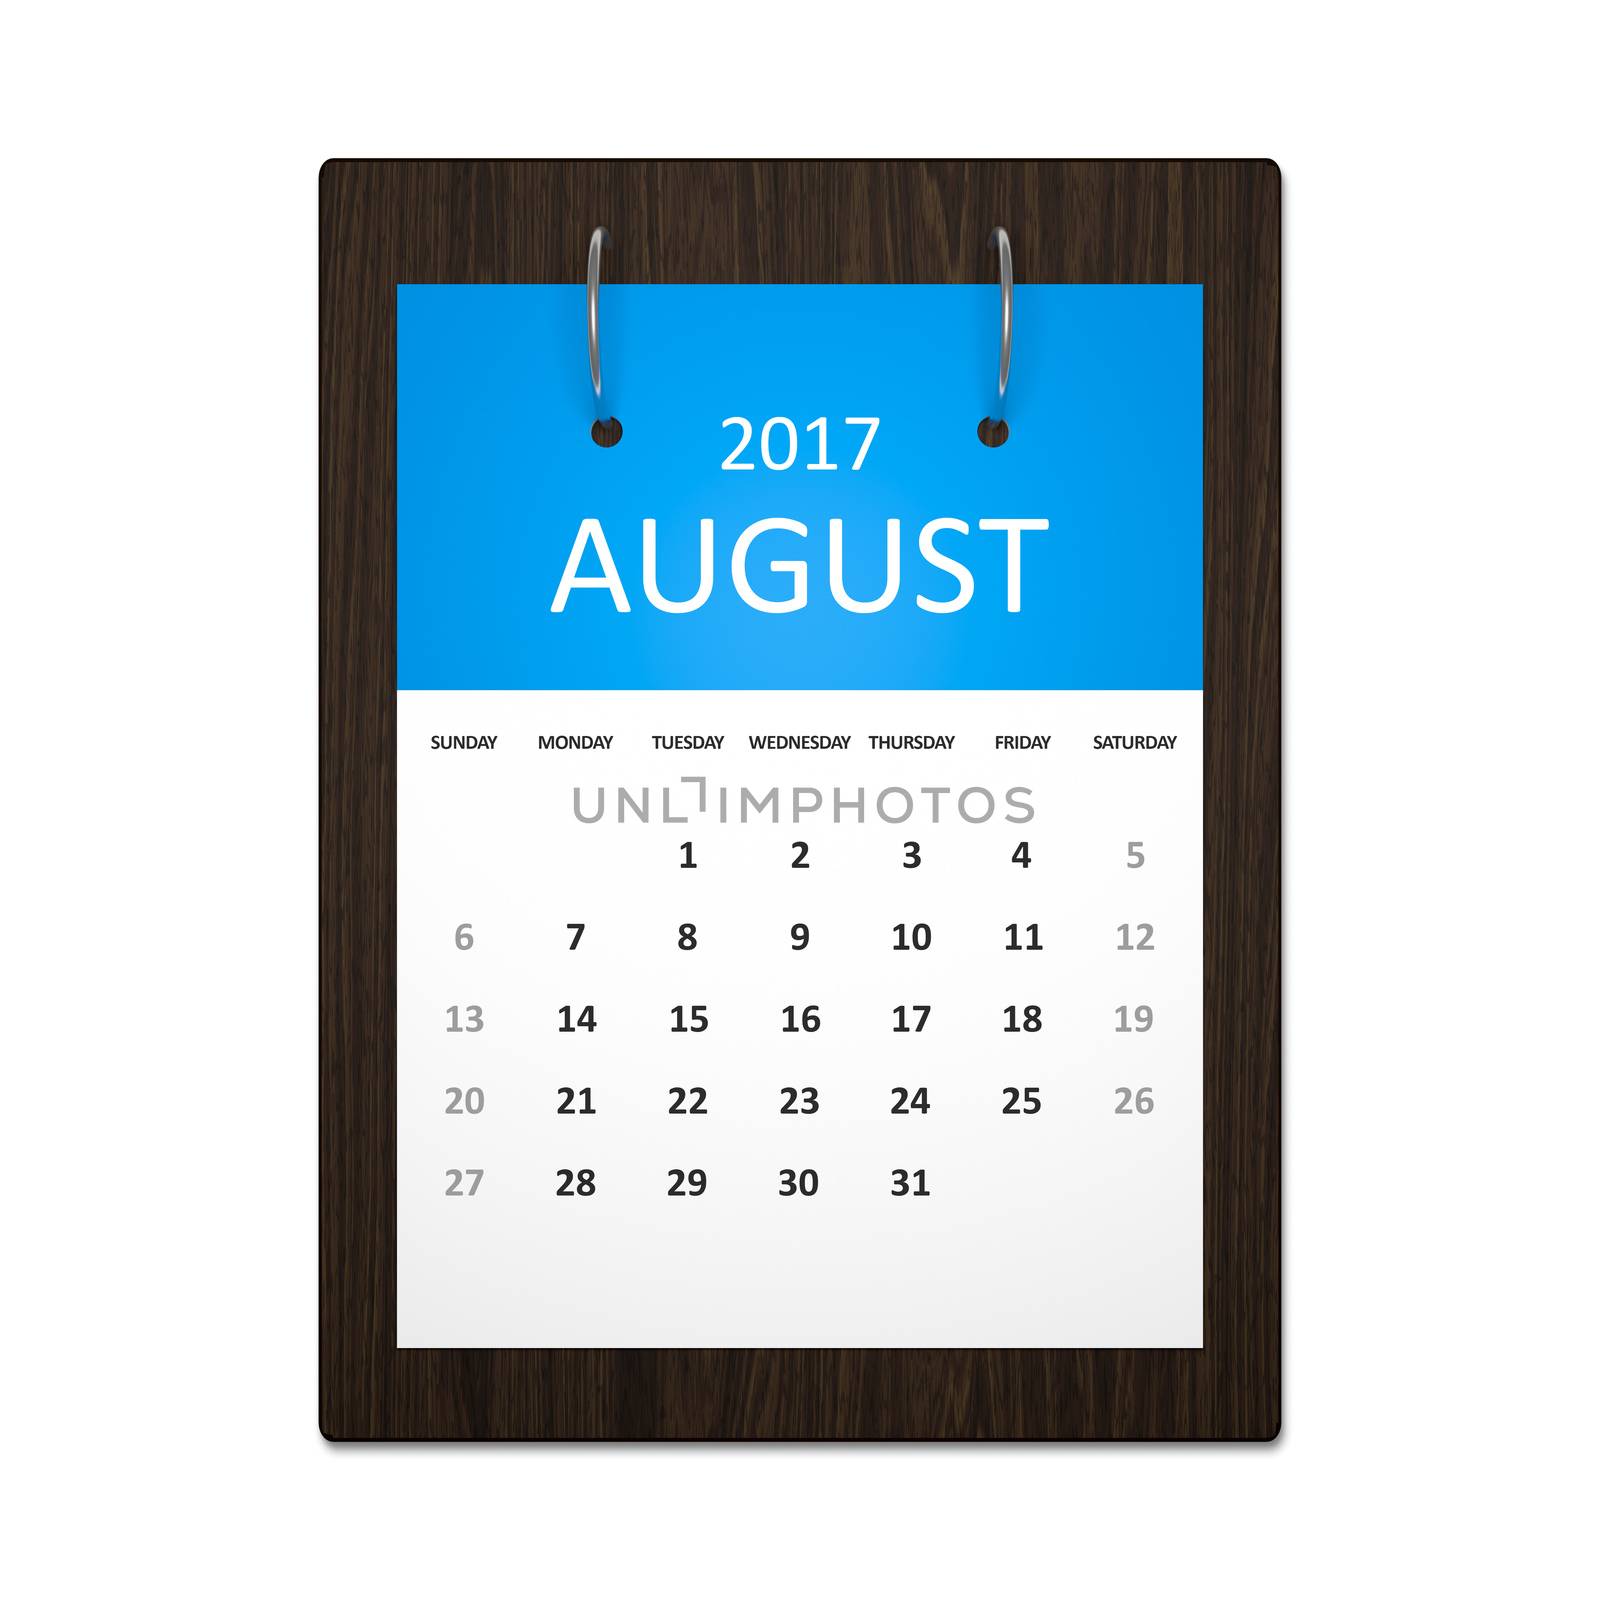 An image of a stylish calendar for event planning 2017 august